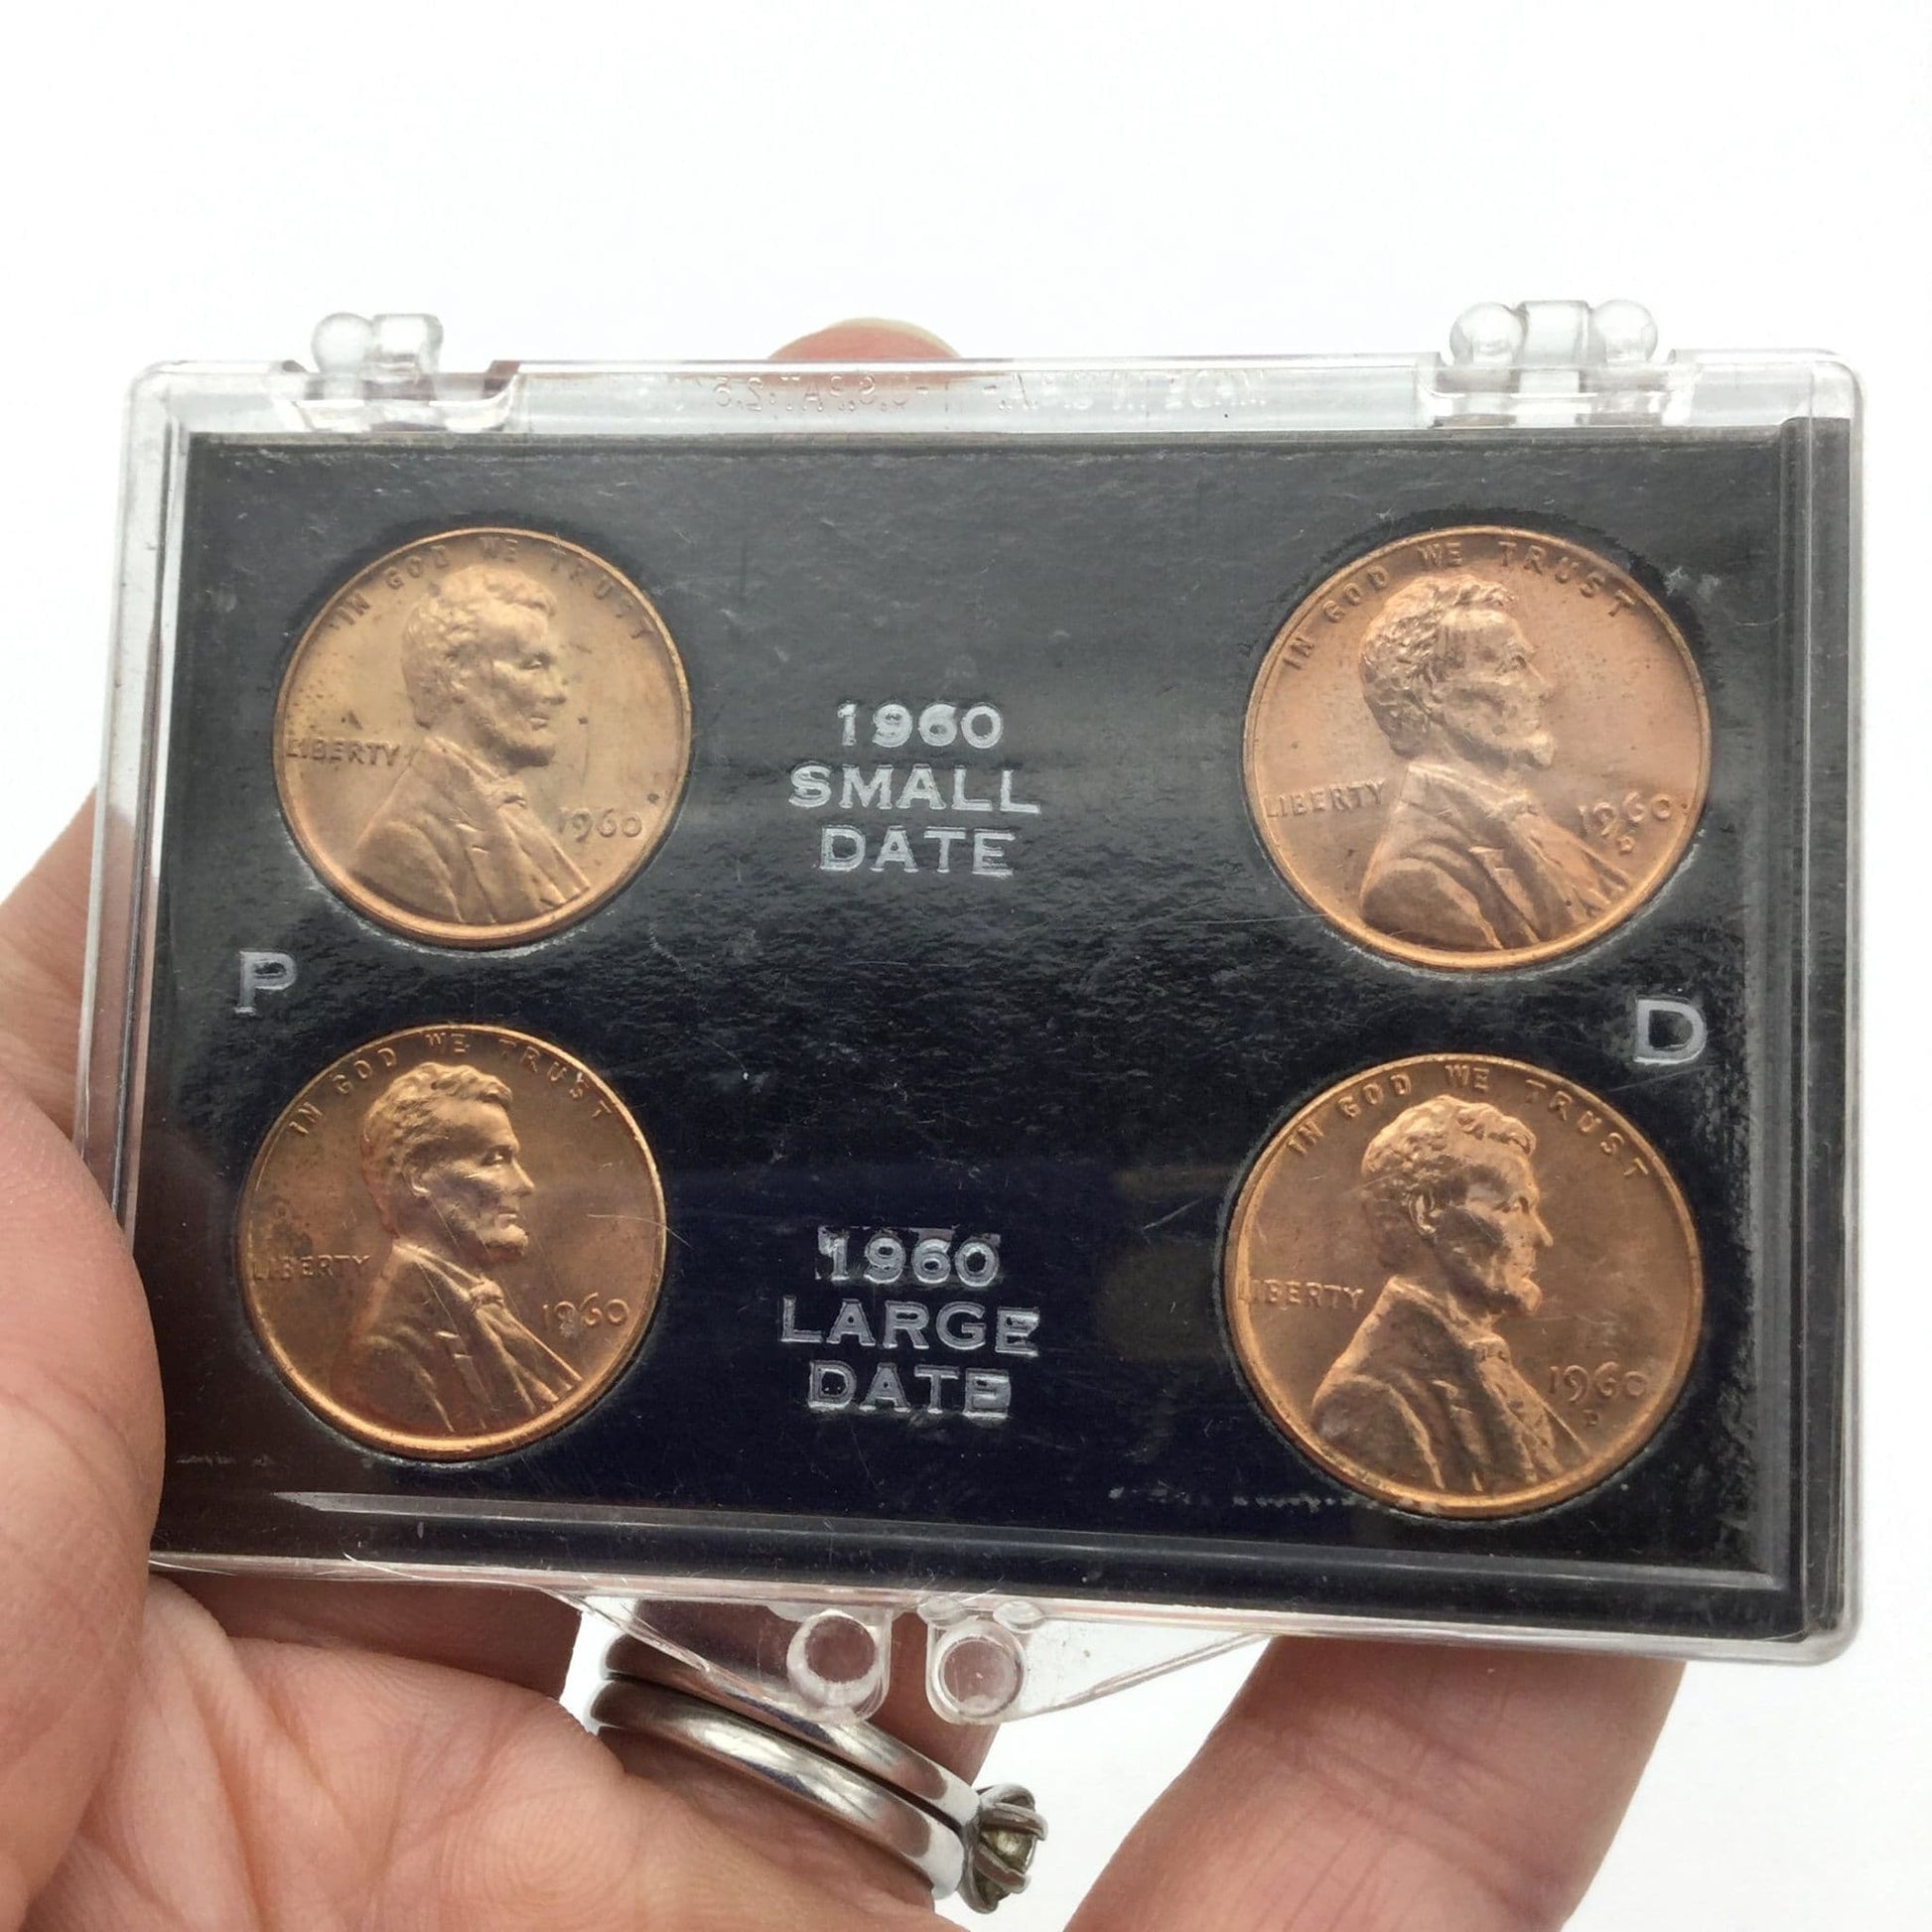 Four Lincoln Memorial Cents in a black holder and perspex case. It has P and D on the blakc holder and 1960 small date and 1960 large date on the black holder held in a hand